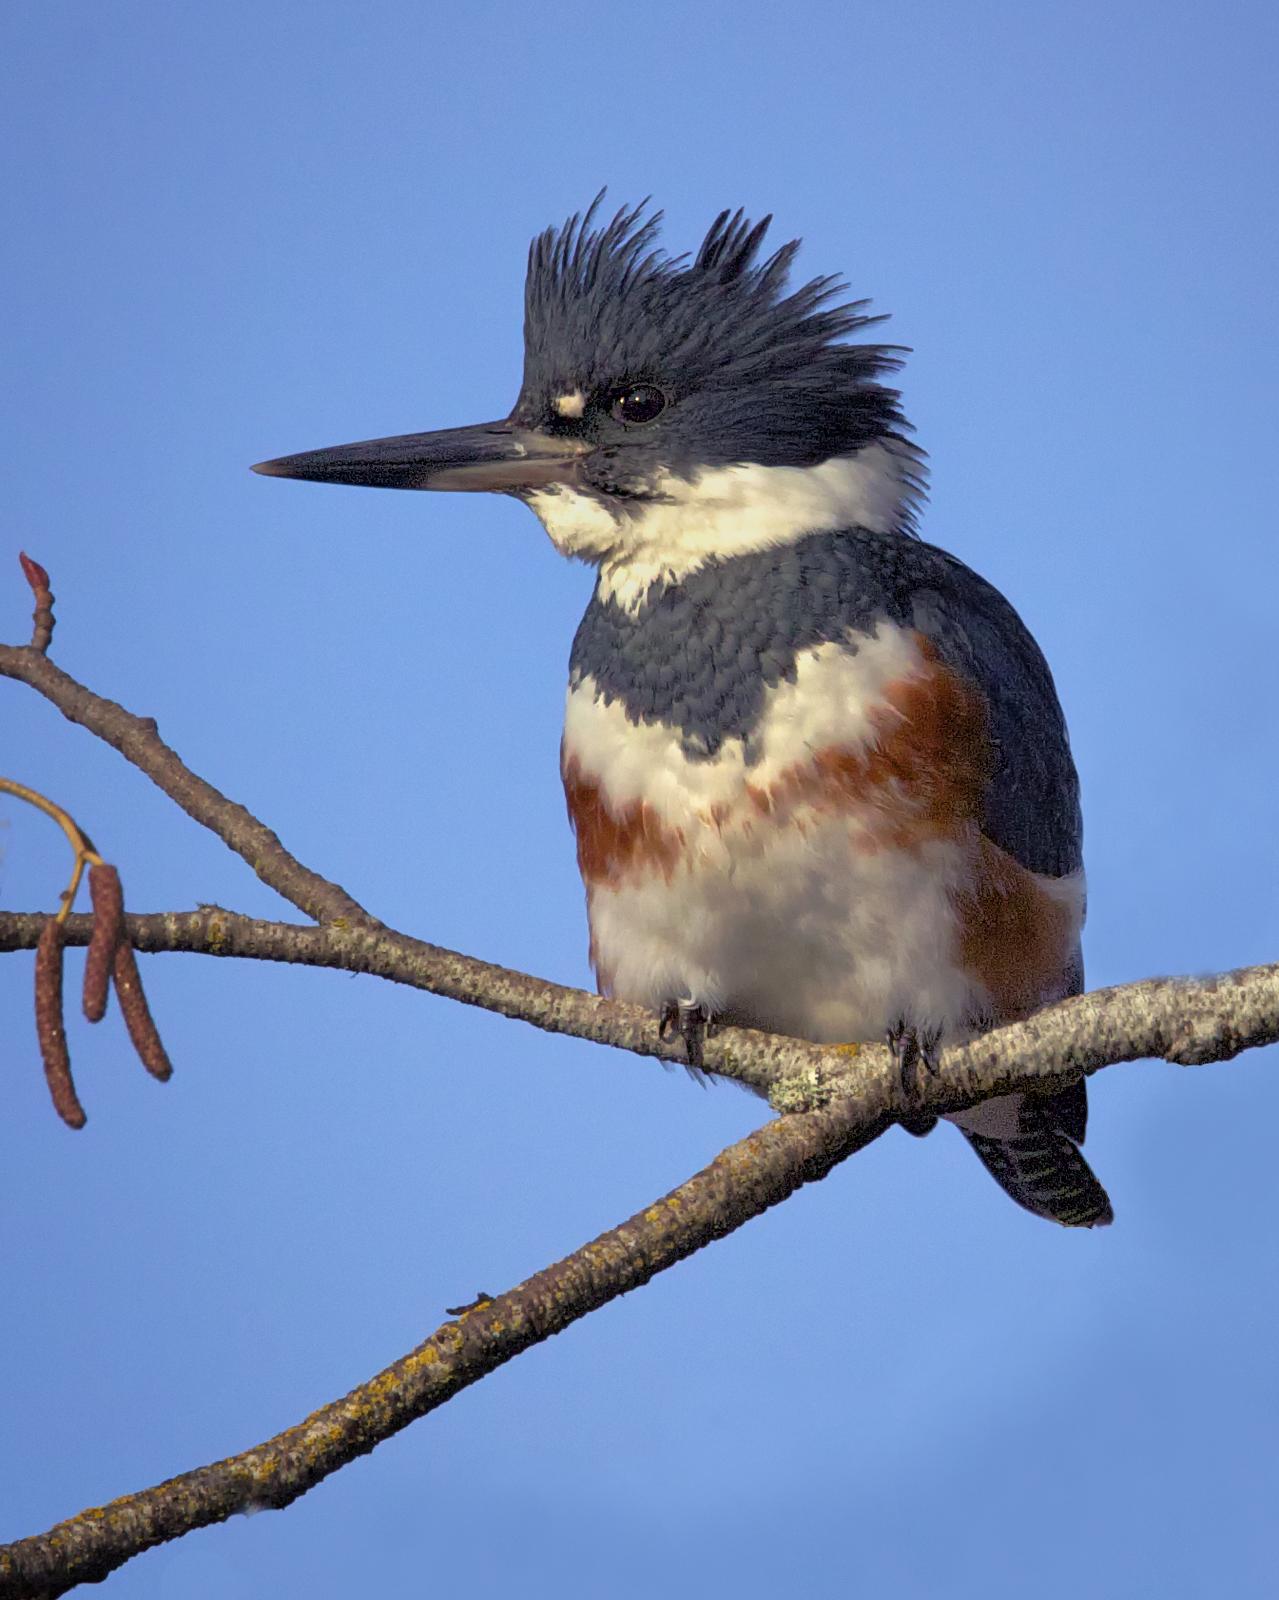 Belted Kingfisher Photo by Mike Liskay